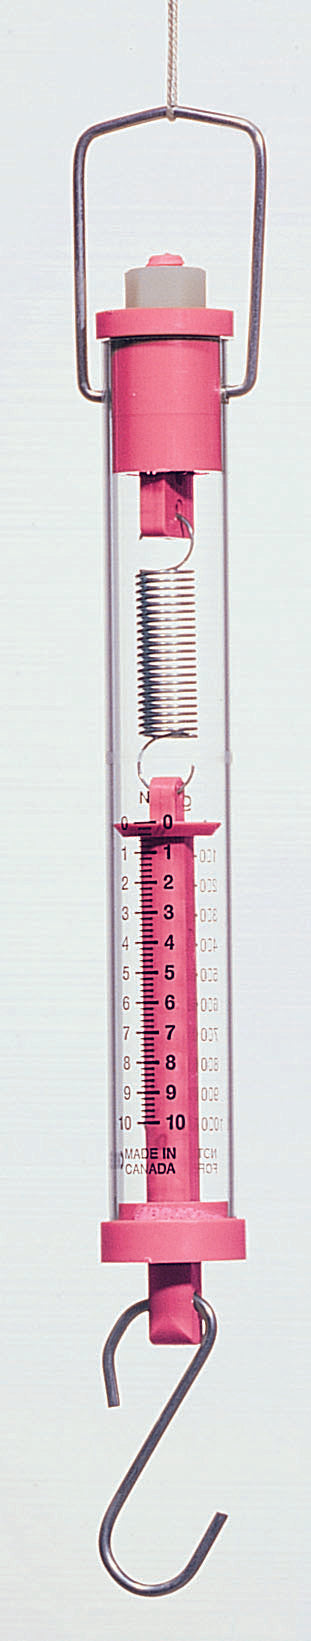 Spring Scale